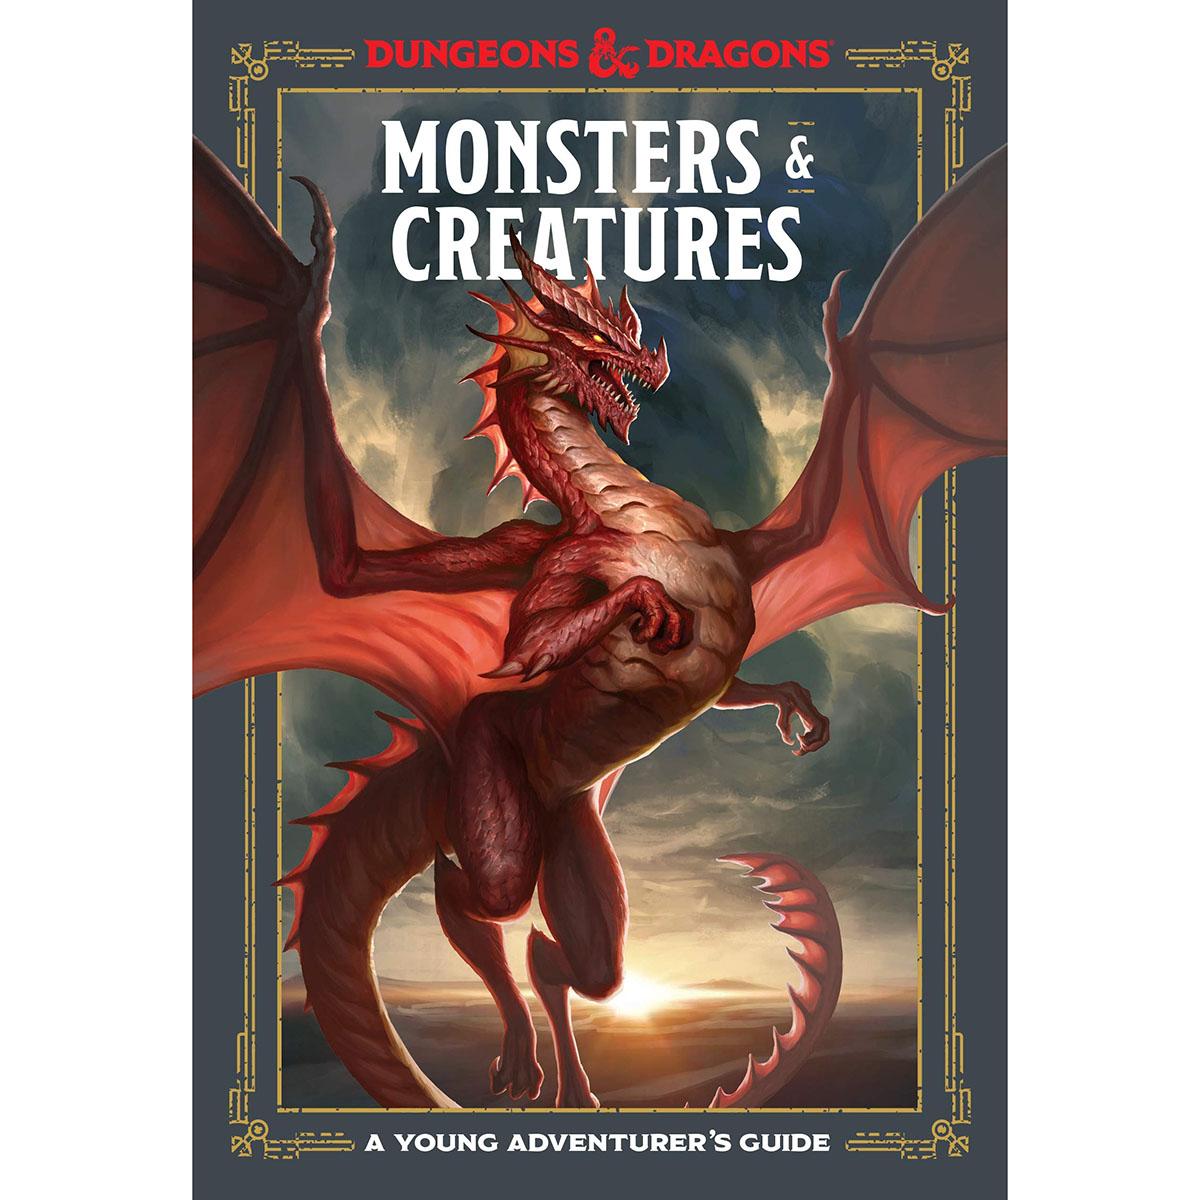 Monsters and Creatures A Young Adventurers Guide Hardcover for $5